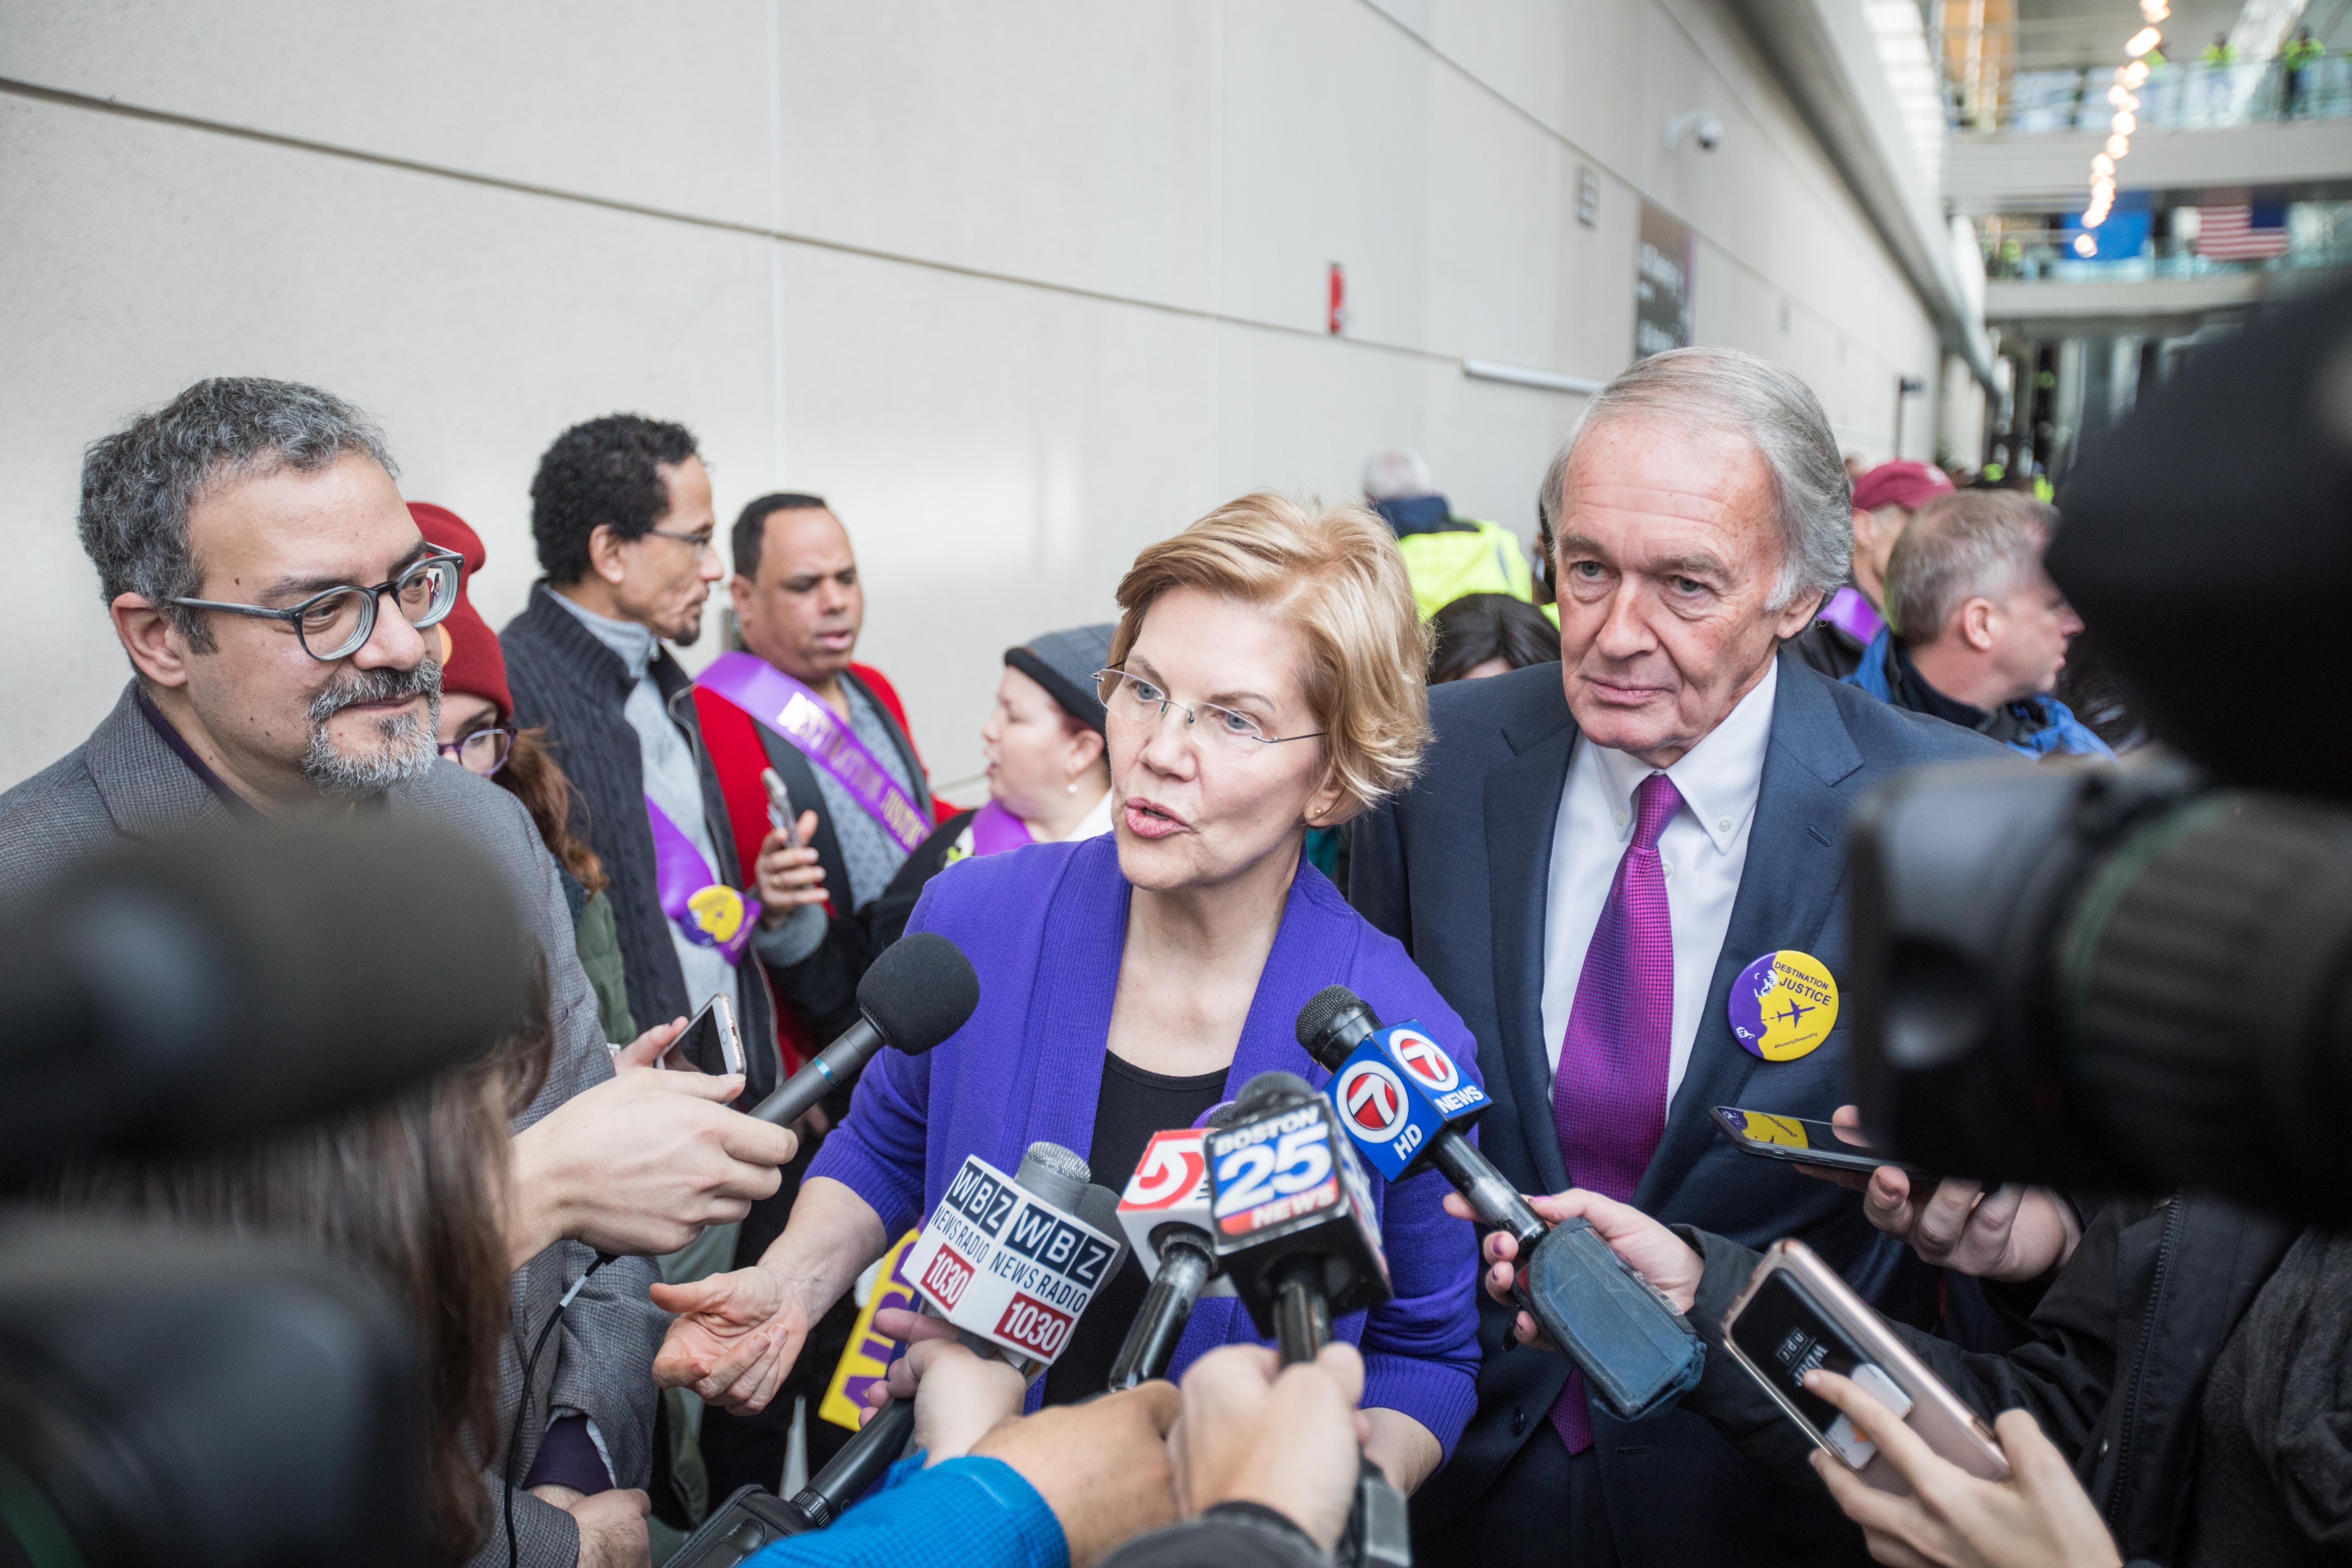 BOSTON, MA - JANUARY 21:  Sen. Elizabeth Warren (D-MA) and Sen. Ed Markey (D-MA) speak to reporters following a rally for airport workers affected by the government shutdown at Boston Logan International Airport on January 21, 2019 in Boston, Massachusetts. As the partial government shutdown enters its fifth week, the stalemate between President Donald Trump and congressional Democrats continues as they cannot come to a bipartisan solution on border security.  (Photo by Scott Eisen/Getty Images)